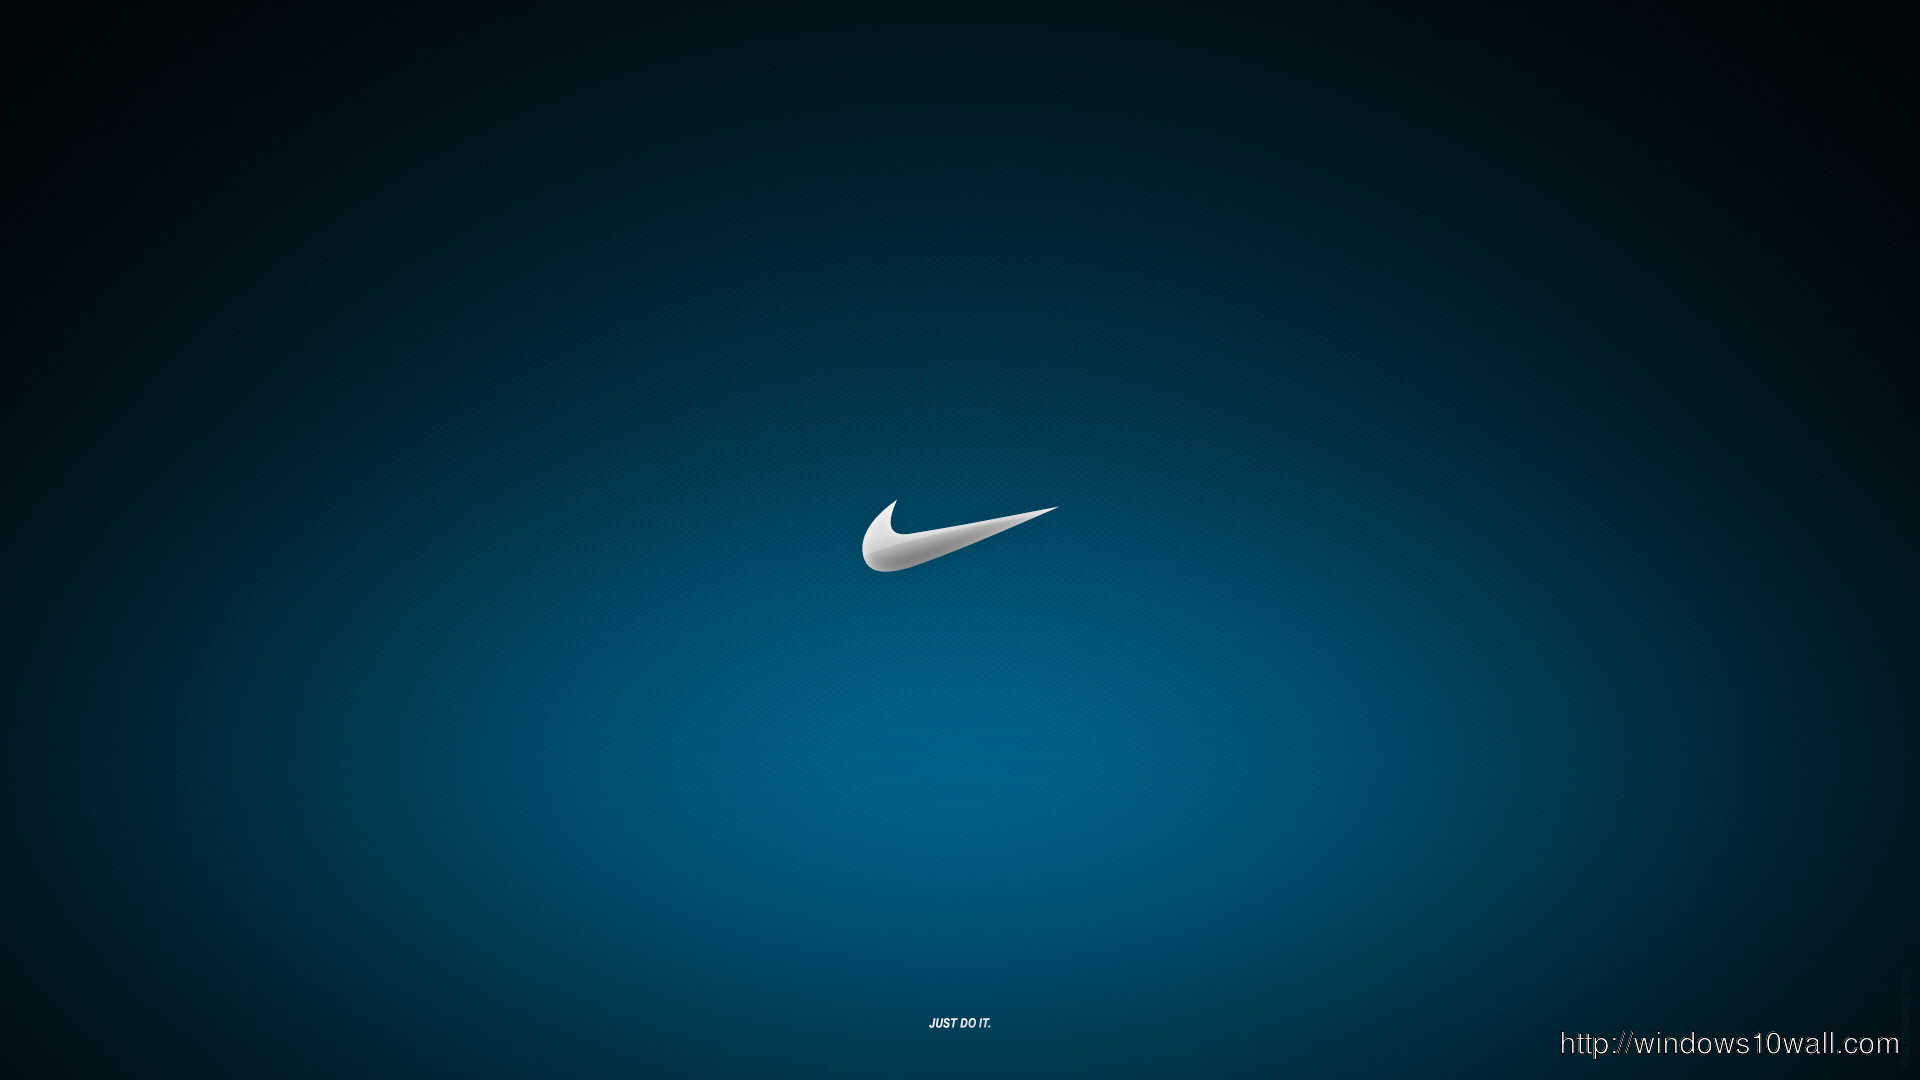 1920x1080 Nike Golf Wallpaper the best 55 images in 2018